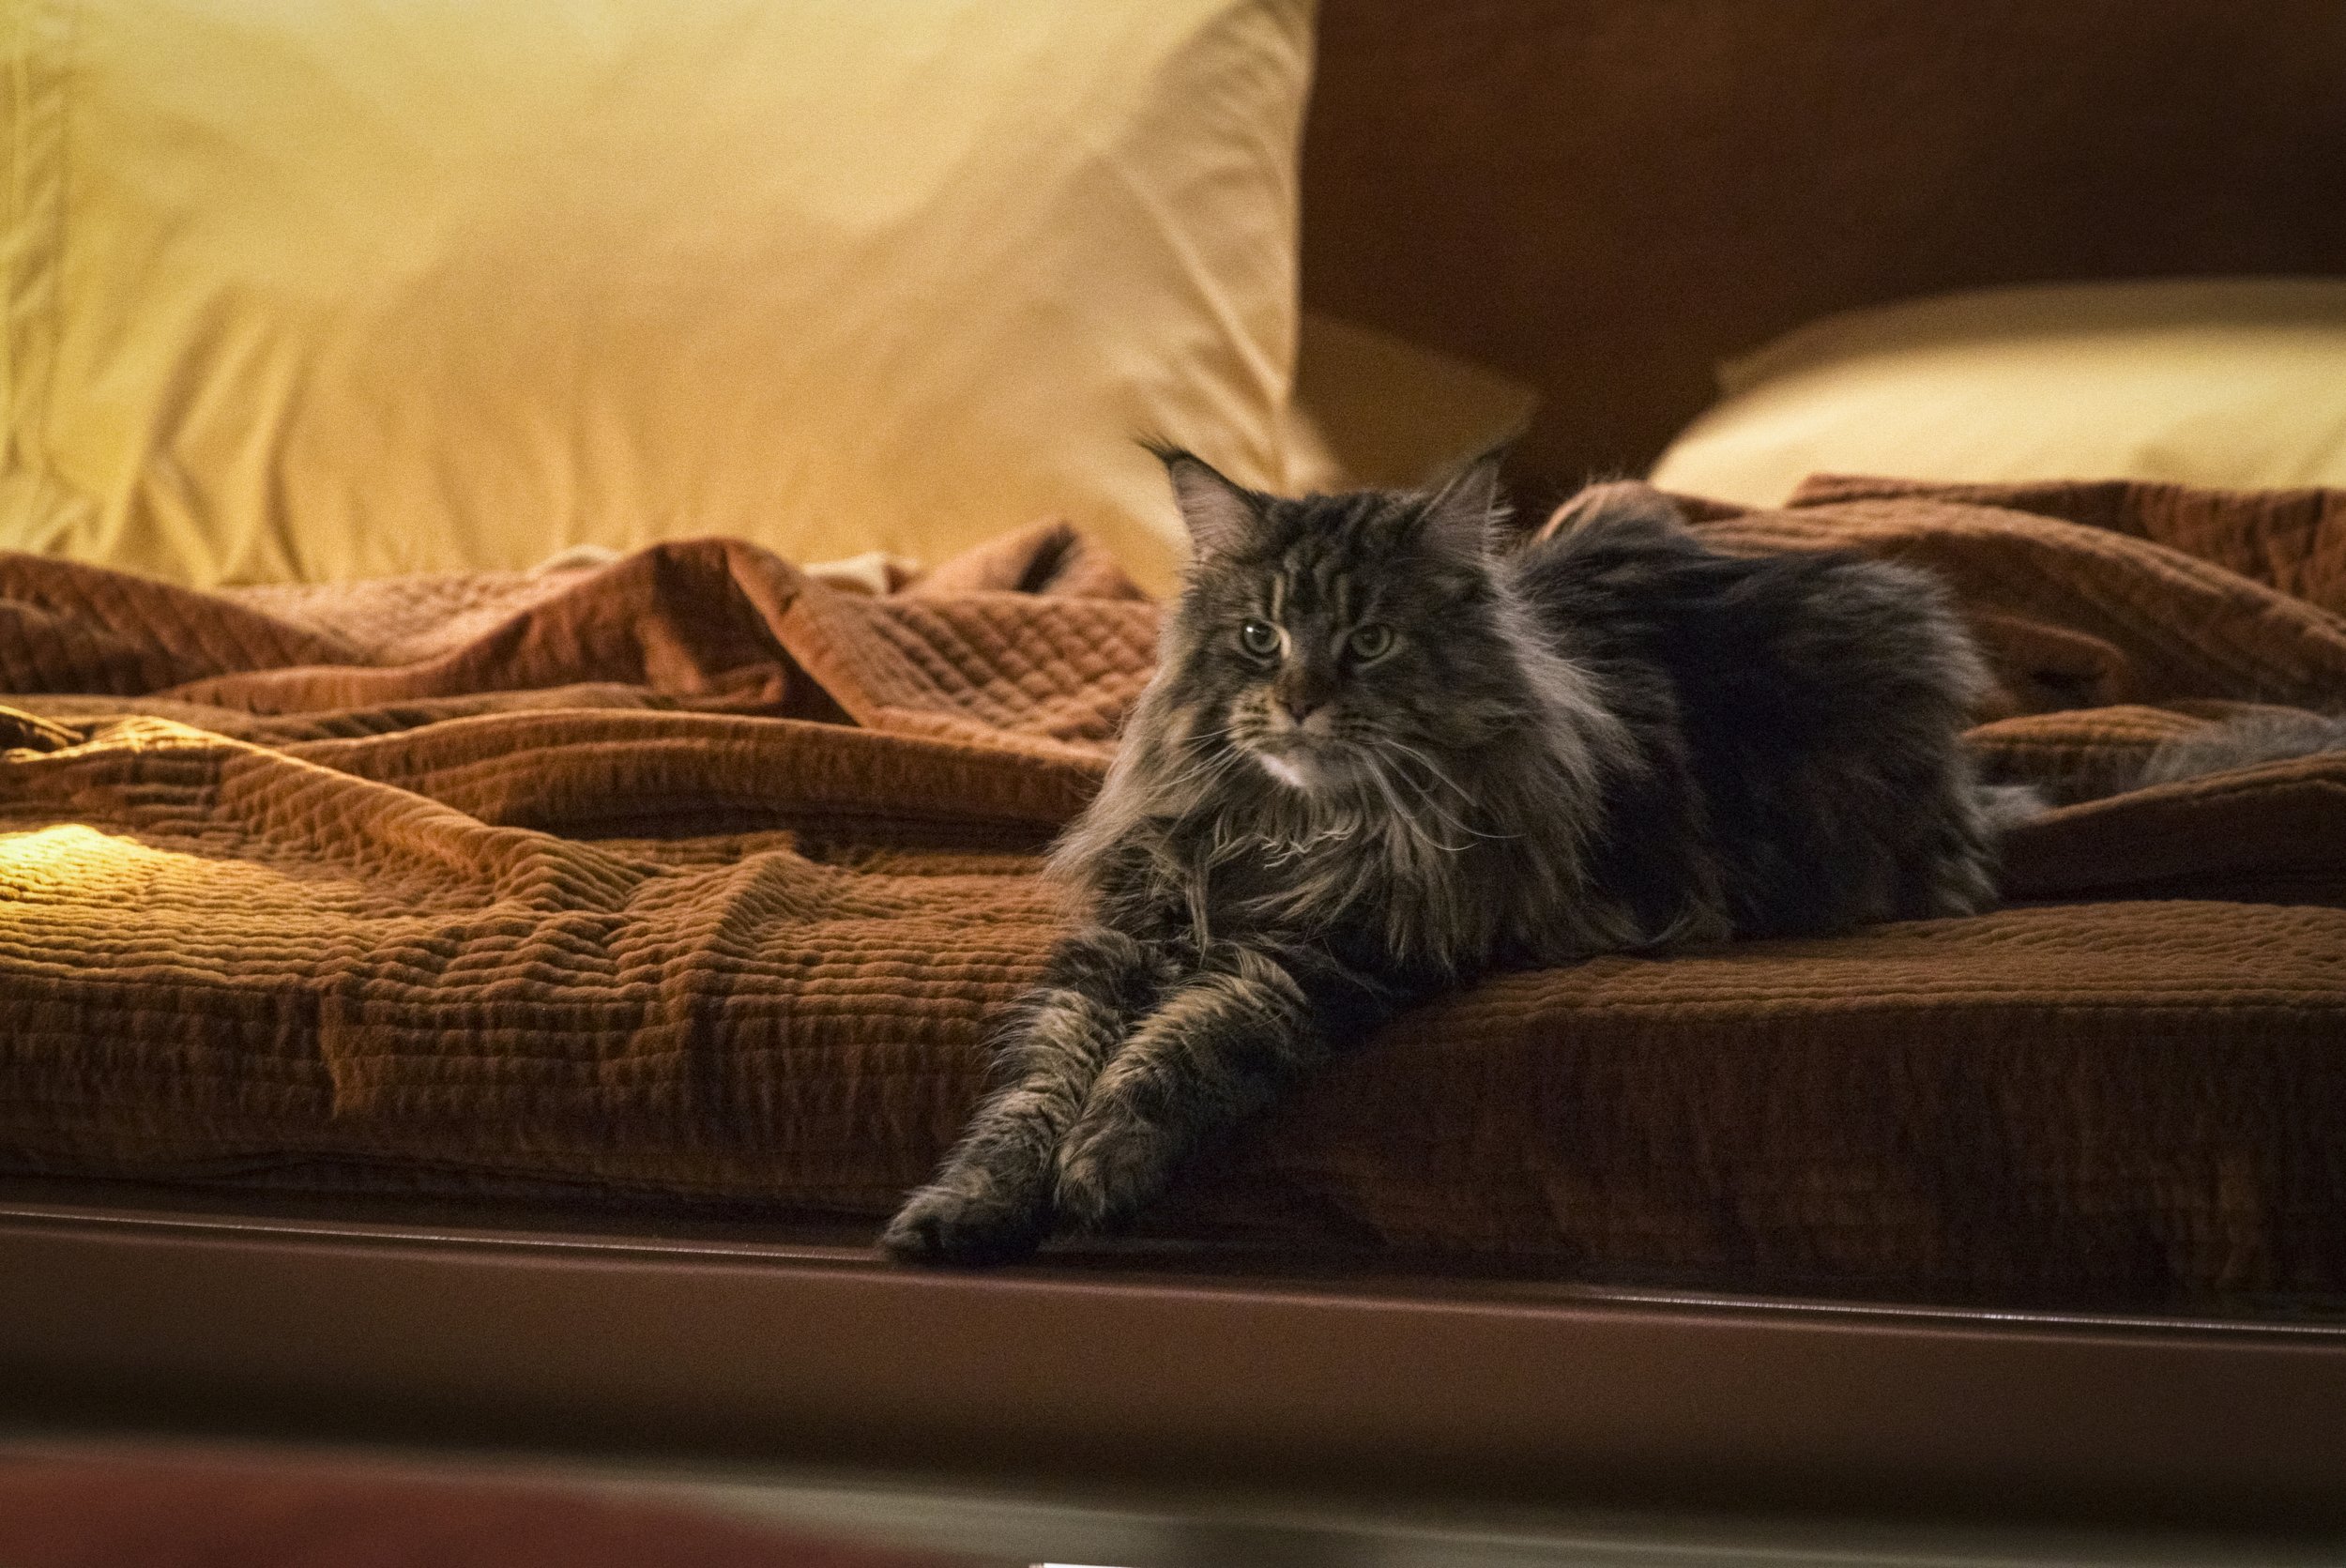   Pictured: Grudge the cat of the Paramount+ original series STAR TREK: DISCOVERY. Photo Cr: Michael Gibson/Paramount+ (C) 2021 CBS Interactive. All Rights Reserved.  